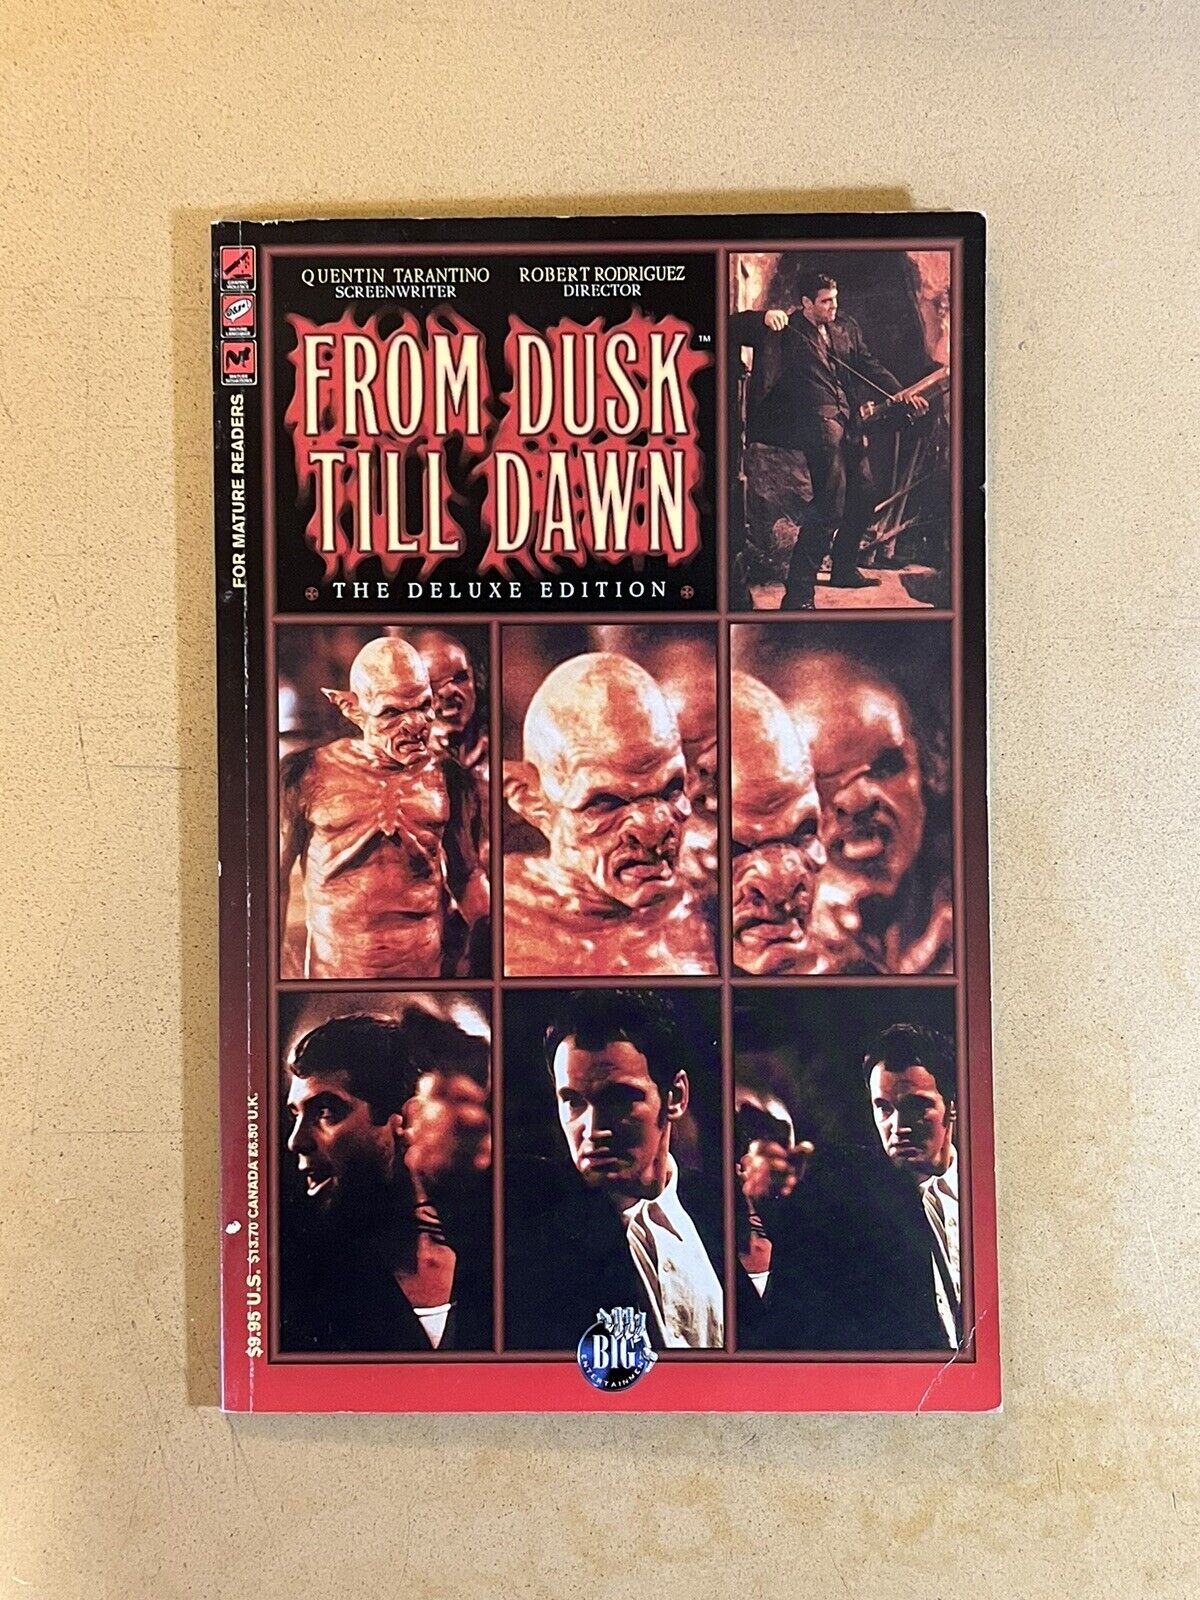 From Dusk Till Dawn The Deluxe Edition Comic Adaptation Big Entertainment 1996